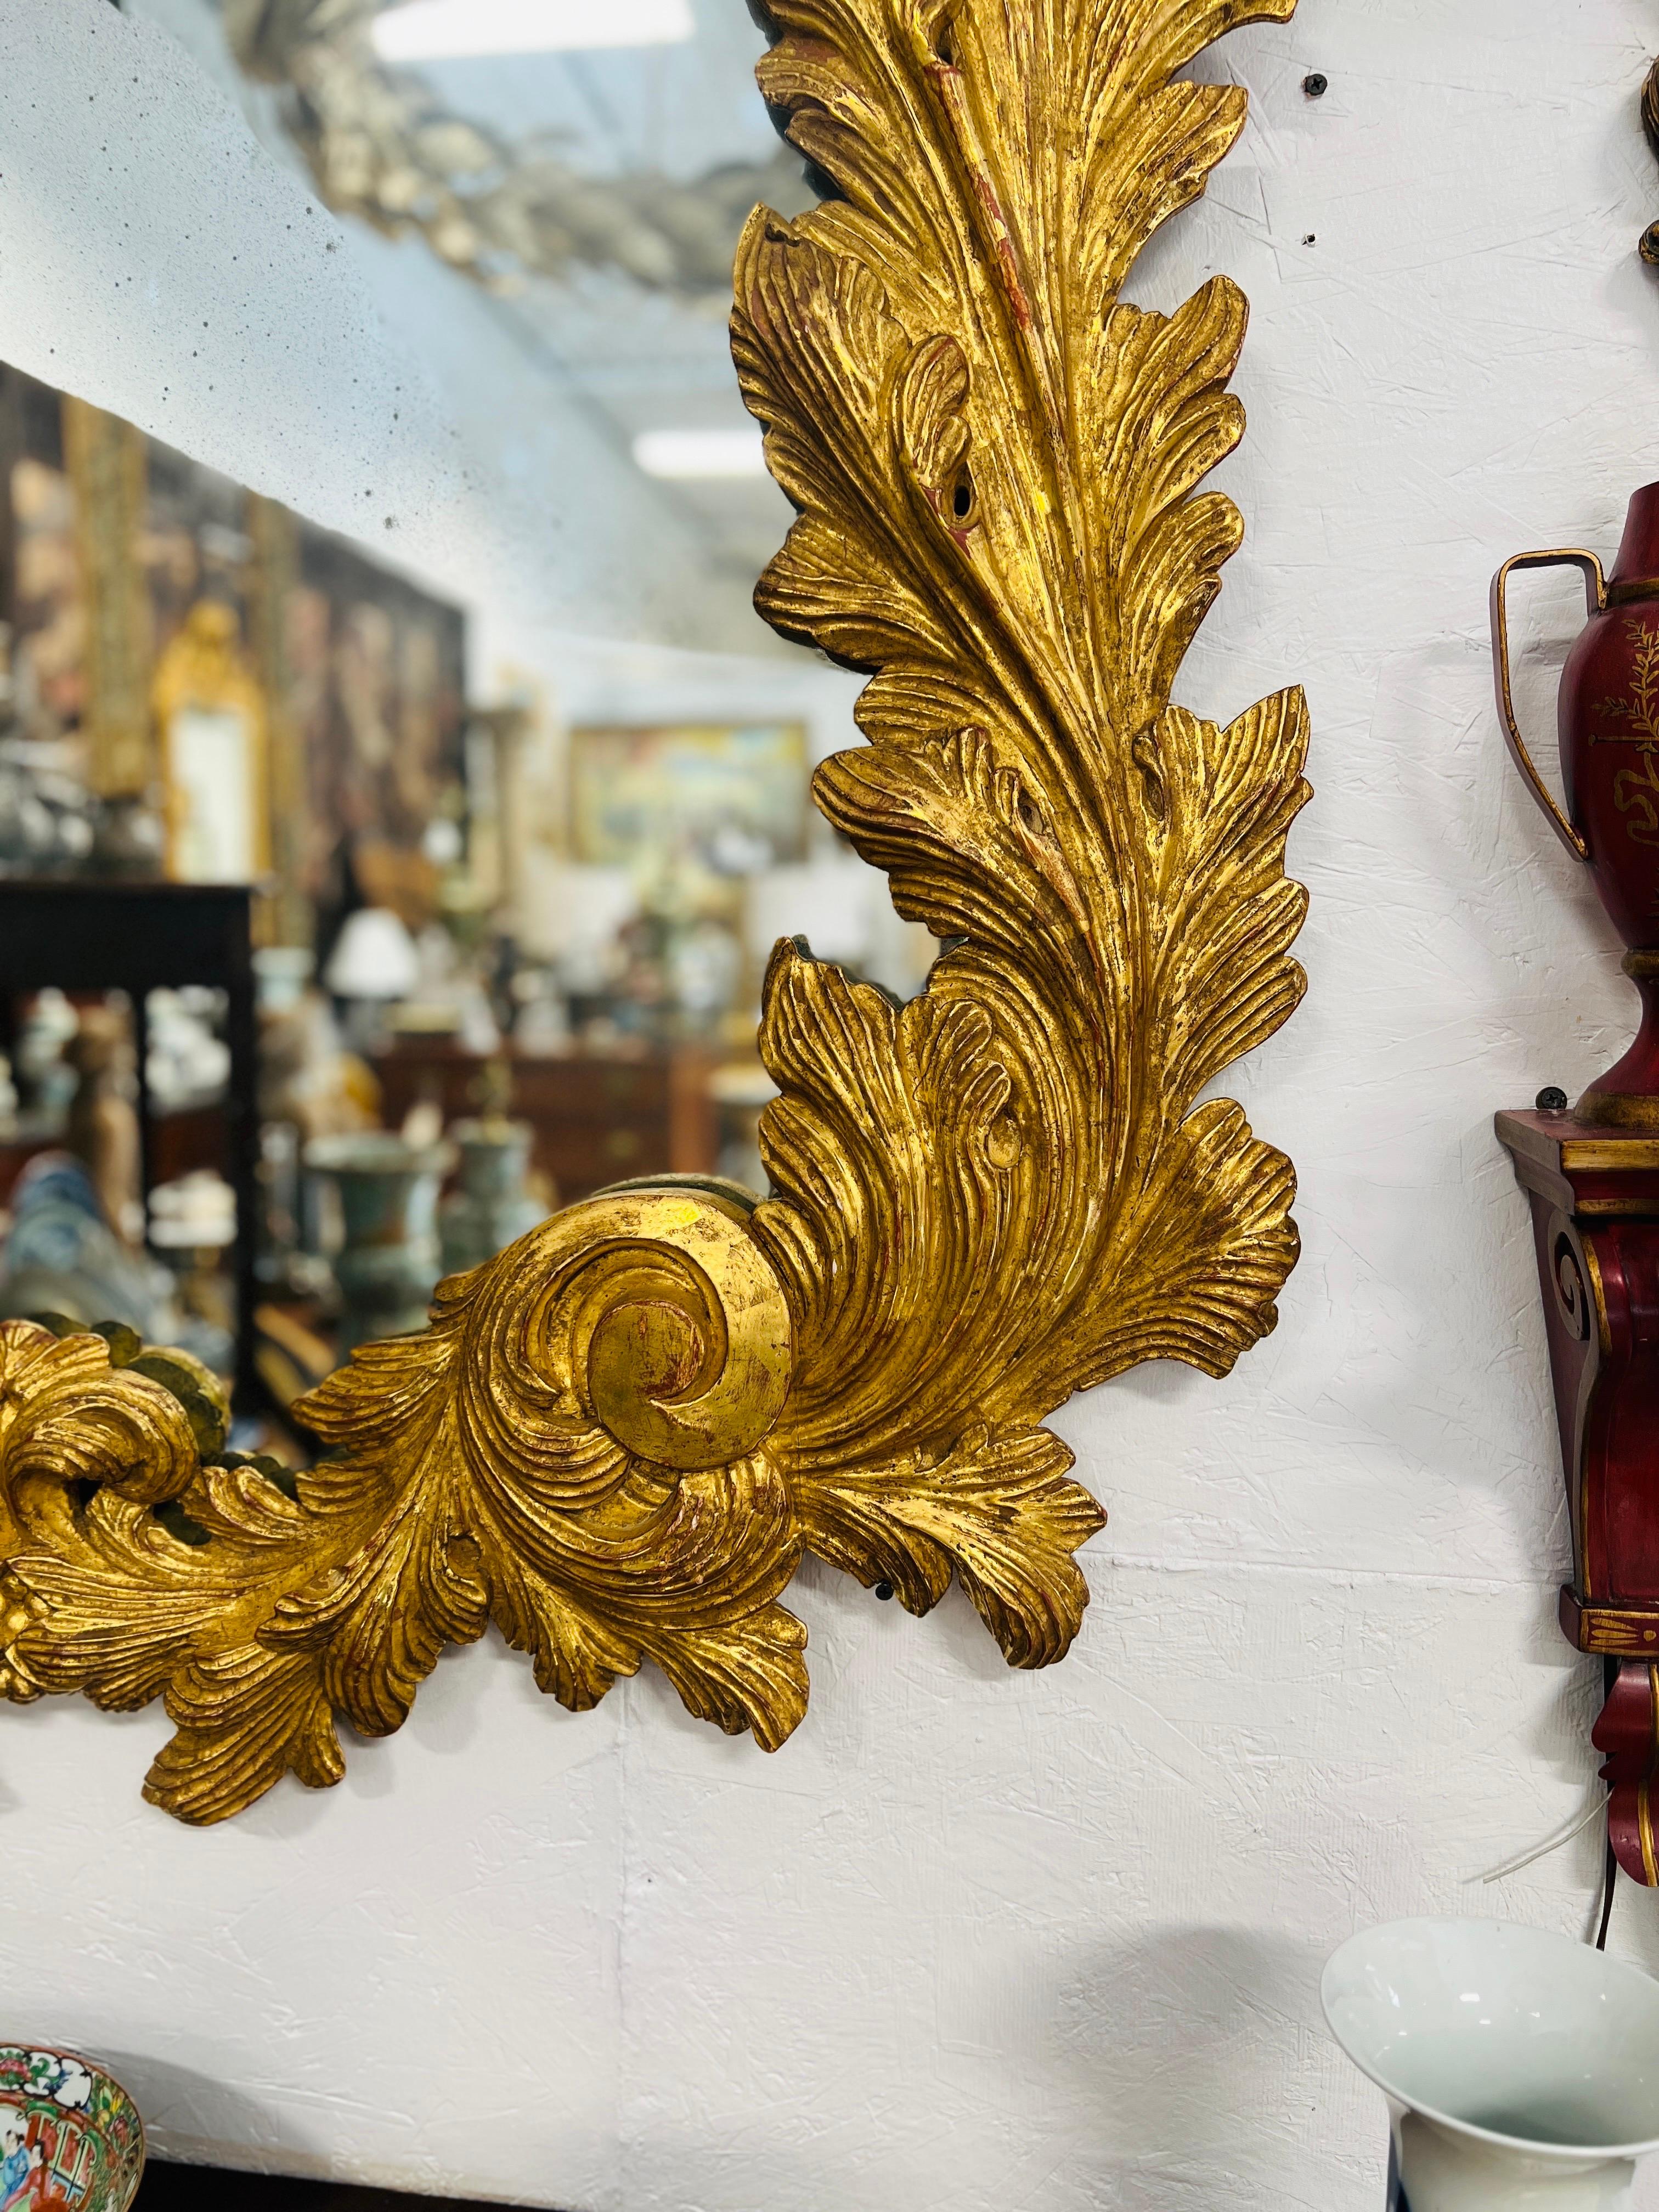 A phenomenal Italian made gilt wood mirror. Sizable frame with fine and intricate carvings in the Rococo taste. Acanthus and foliate leaf edges encompass the carved borders, scrolling details, ‘antiqued’ glass and original gold leaf make this mirror